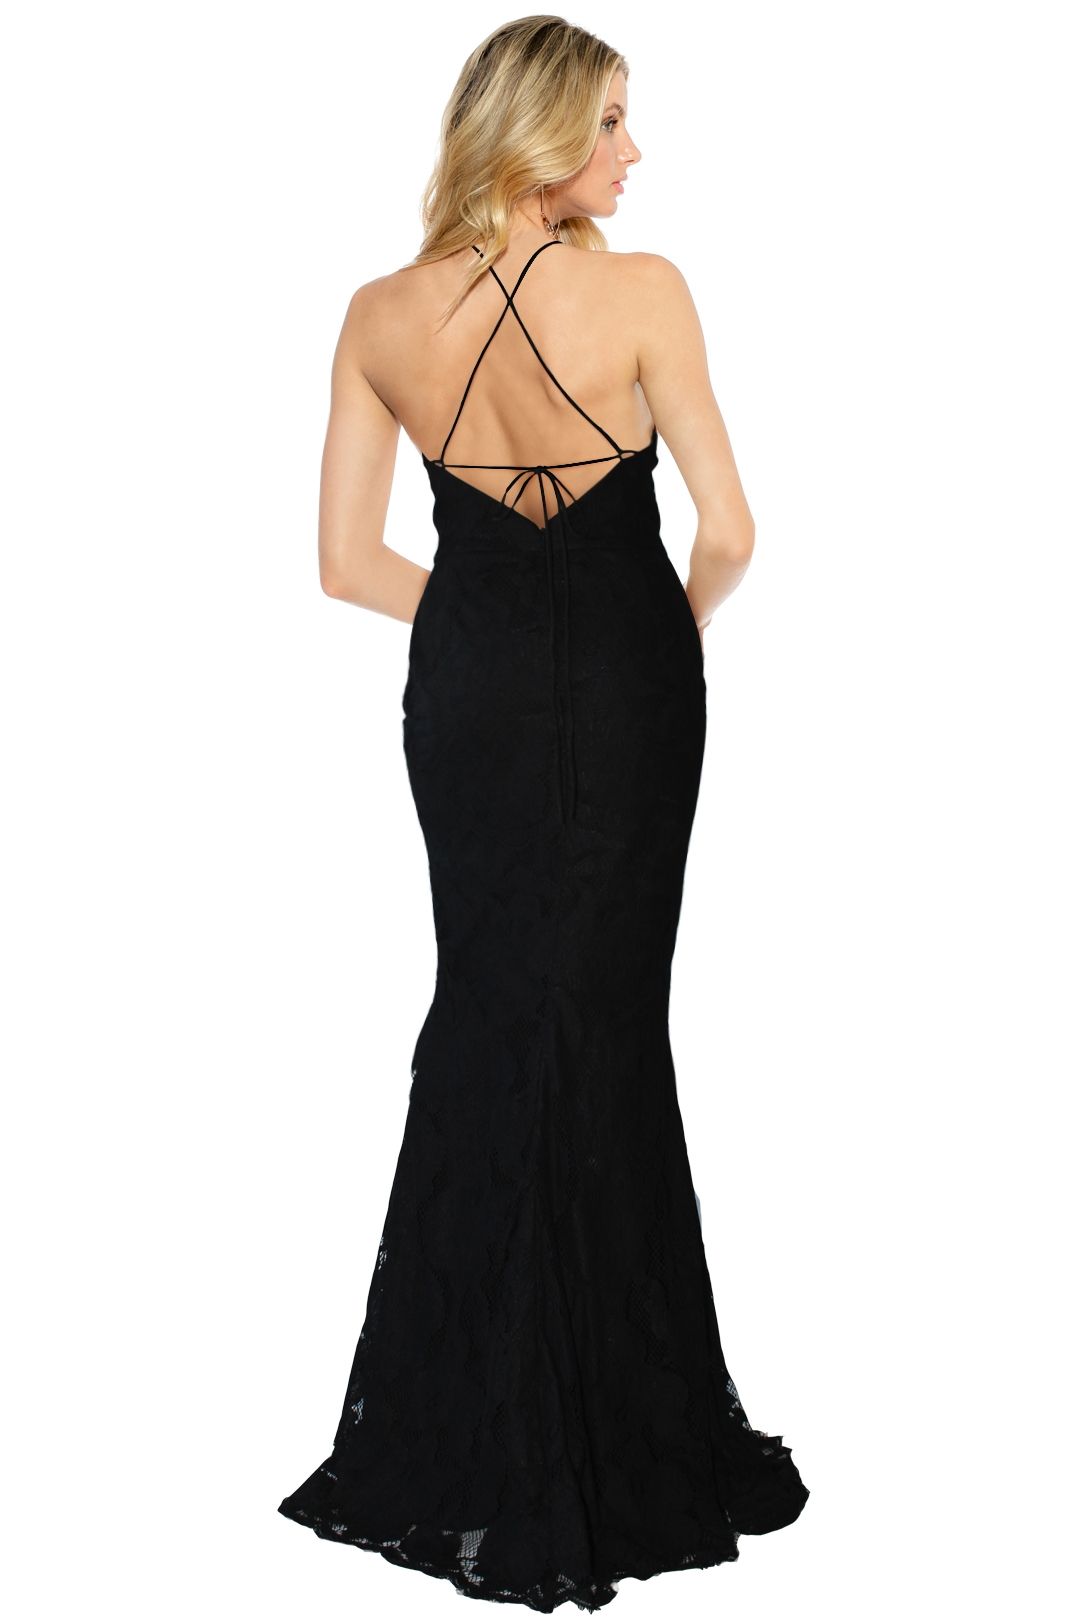 Grace and Hart - Allure Gown - Black - Back